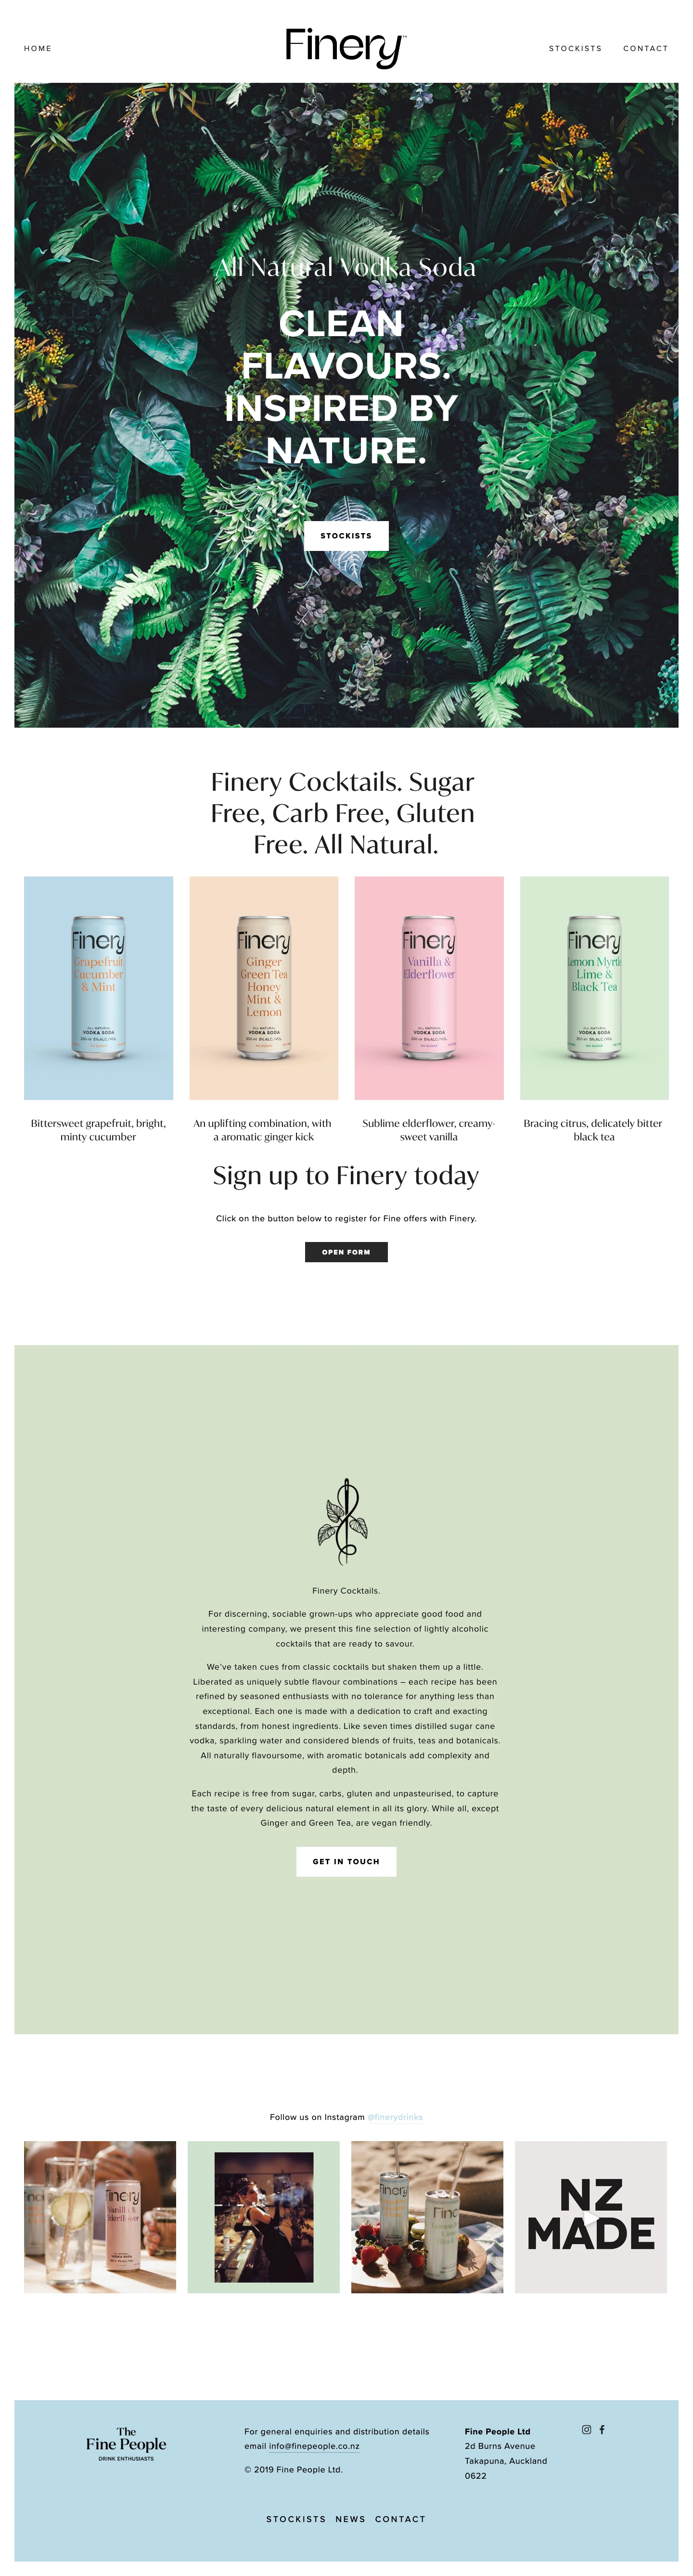 Finery Landing Page Example: Finery Cocktails. Sugar Free, Carb Free, Gluten Free. All Natural.